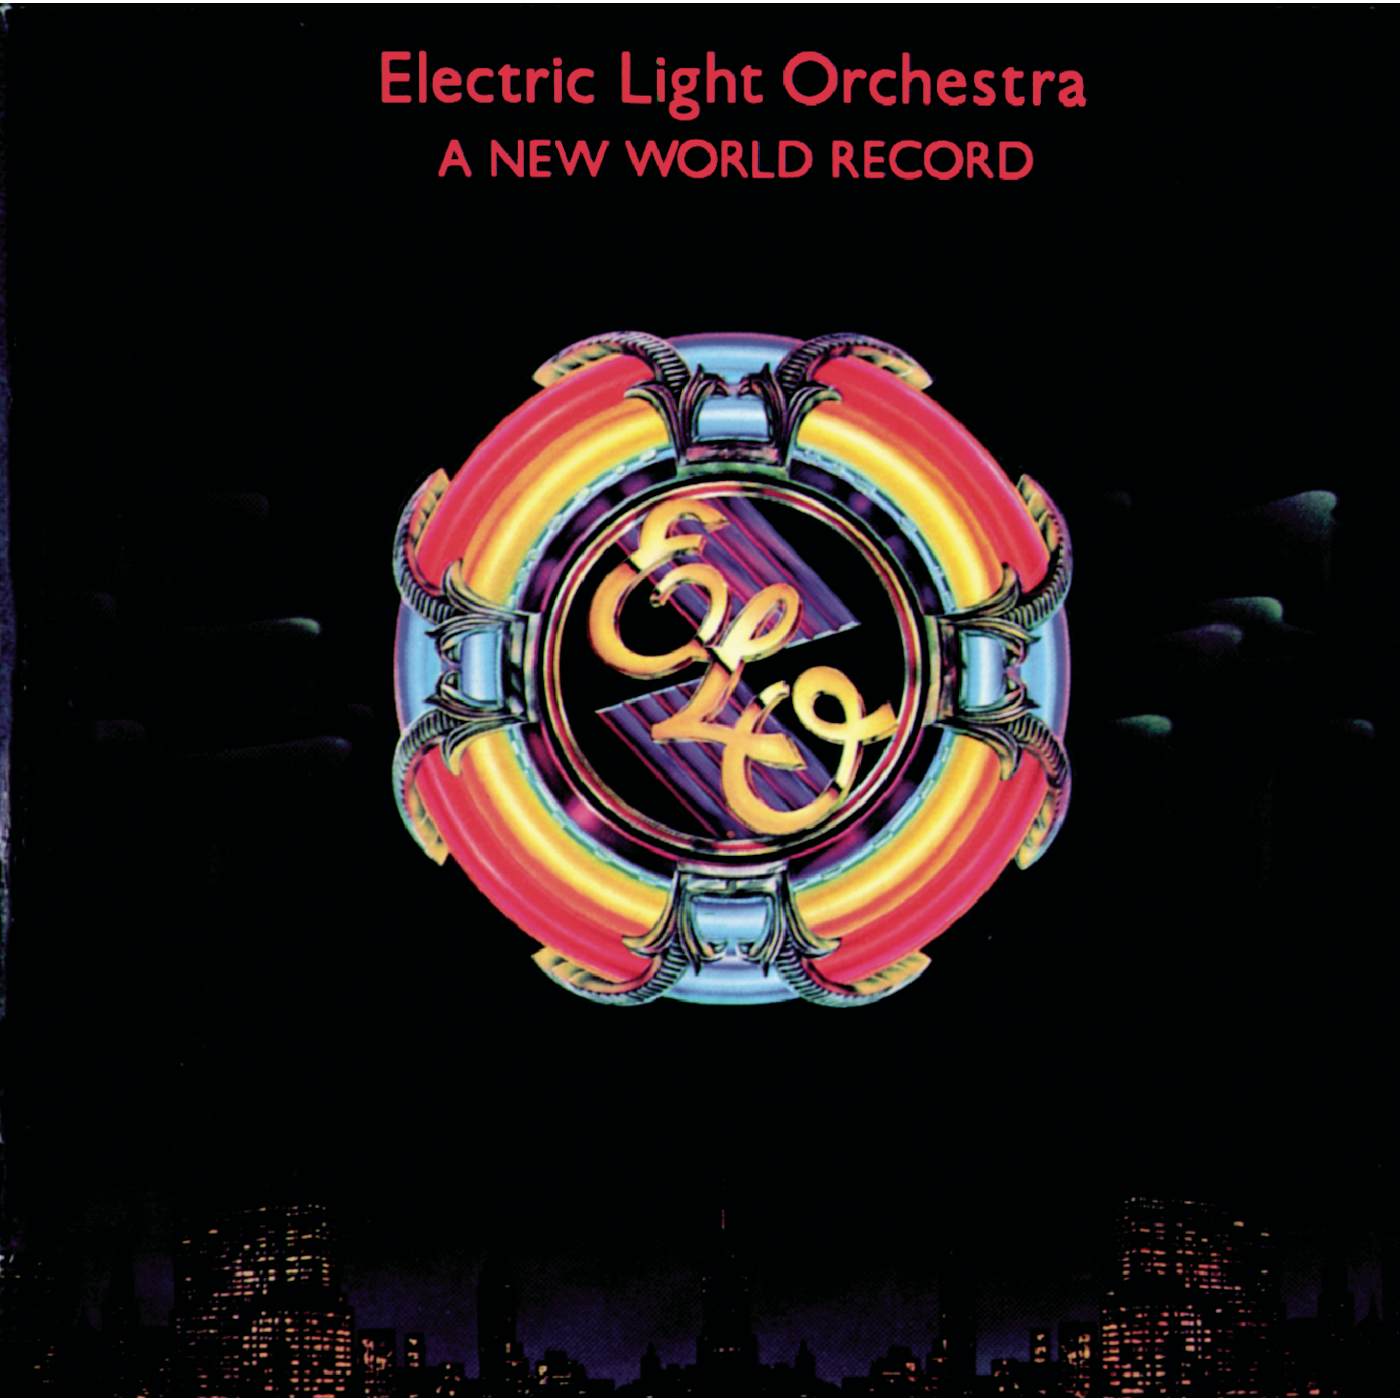 ELO (Electric Light Orchestra) NEW WORLD RECORD CD